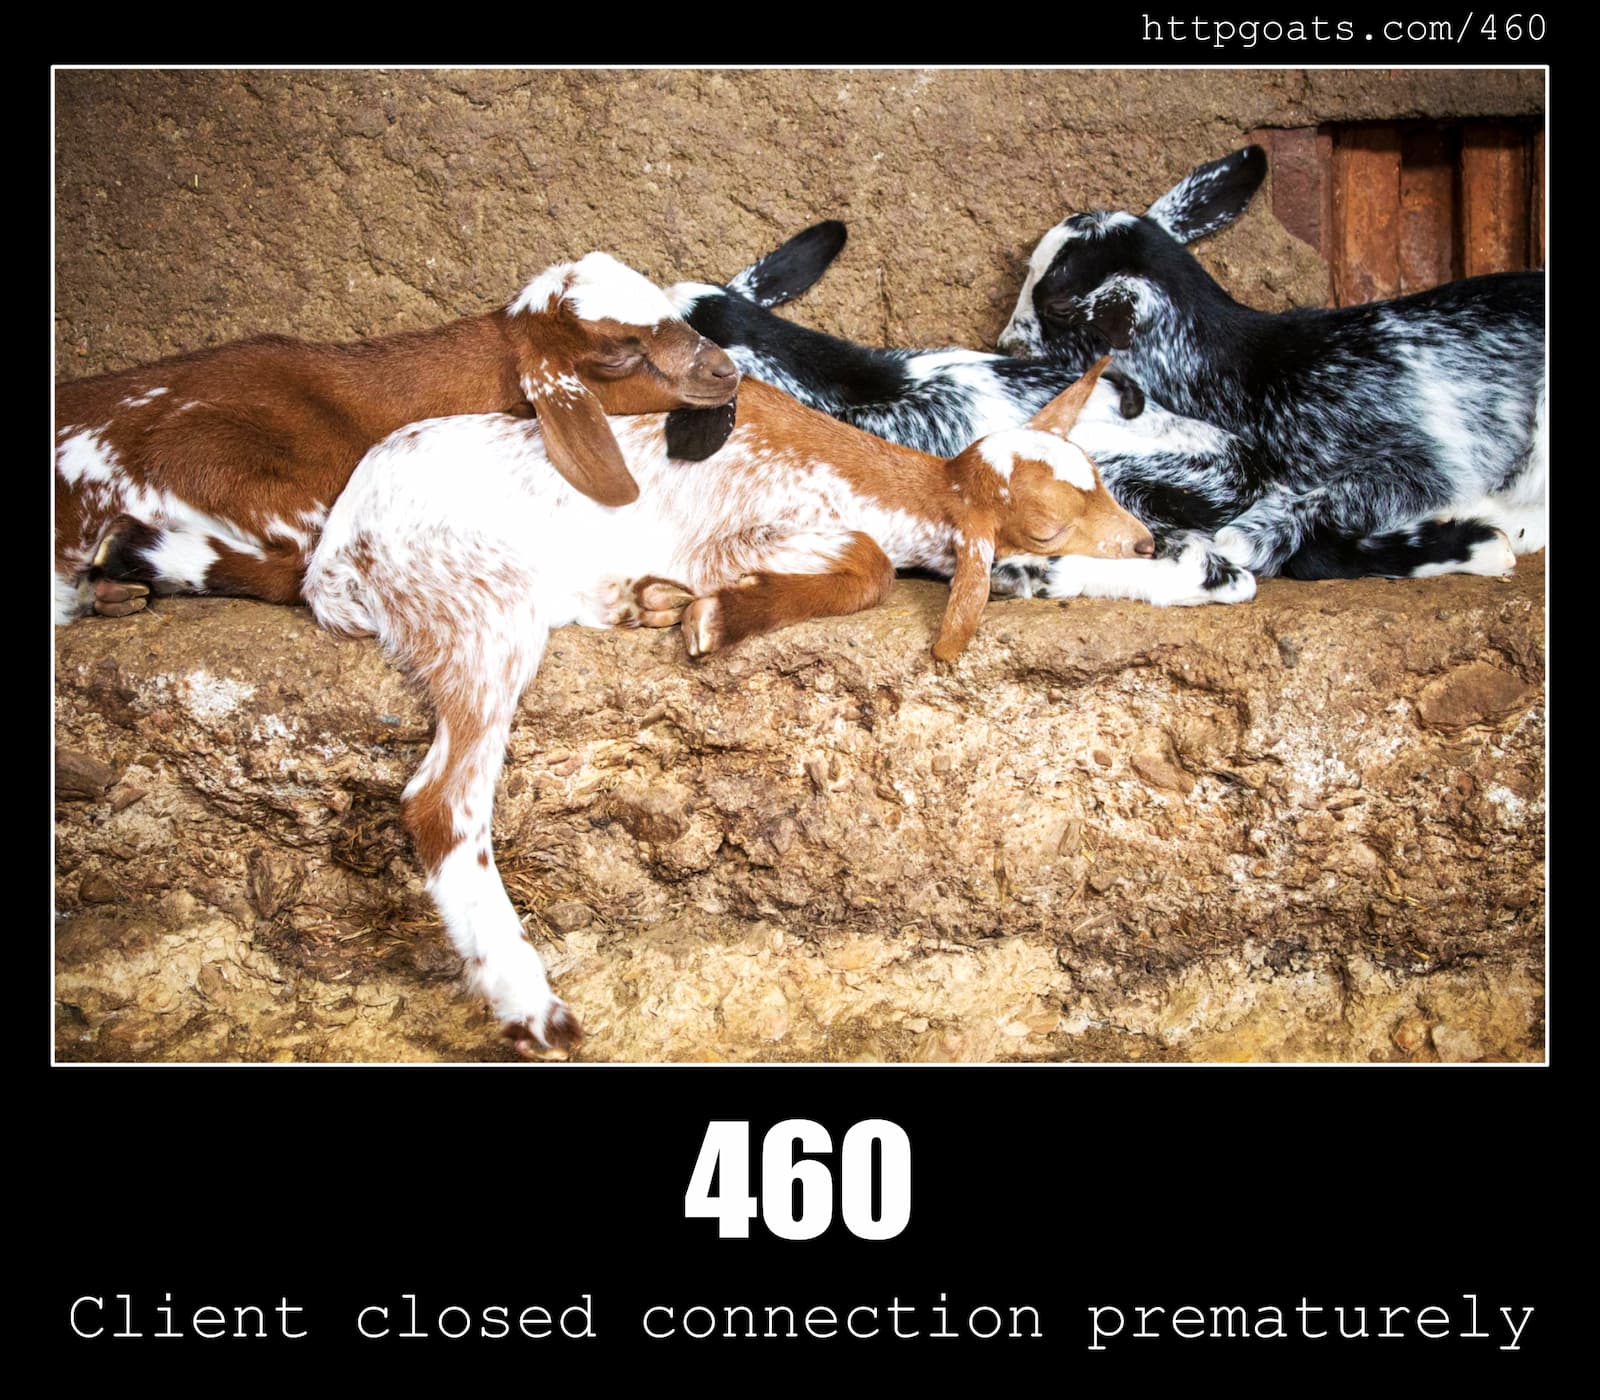 HTTP Status Code 460 Client closed connection prematurely & Goats